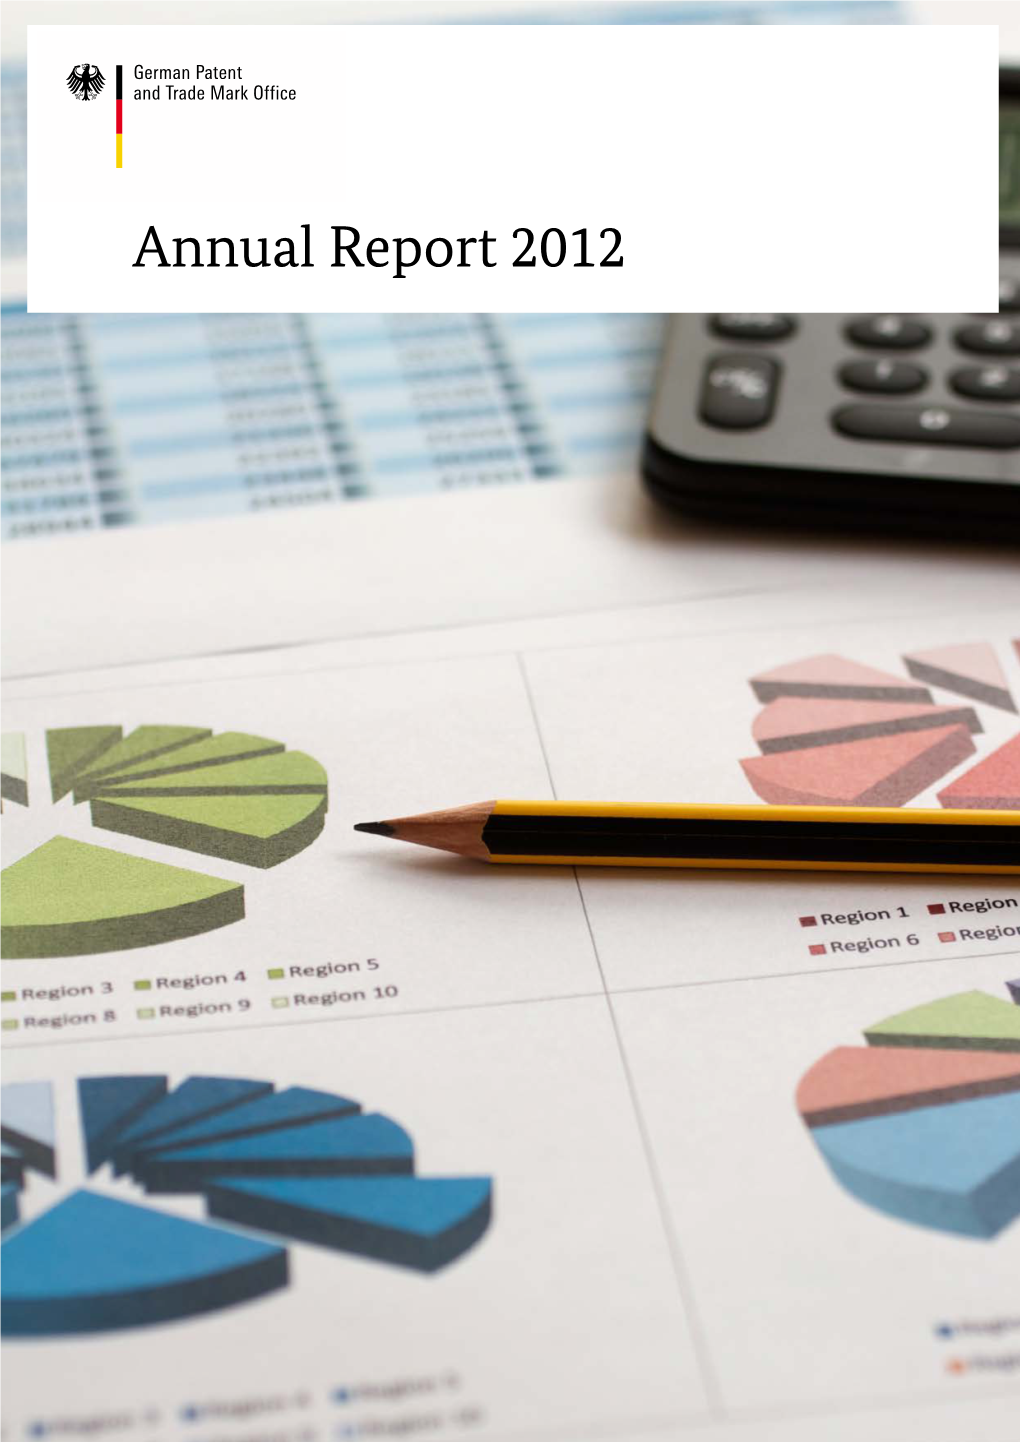 Annual Report 2012 at a Glance